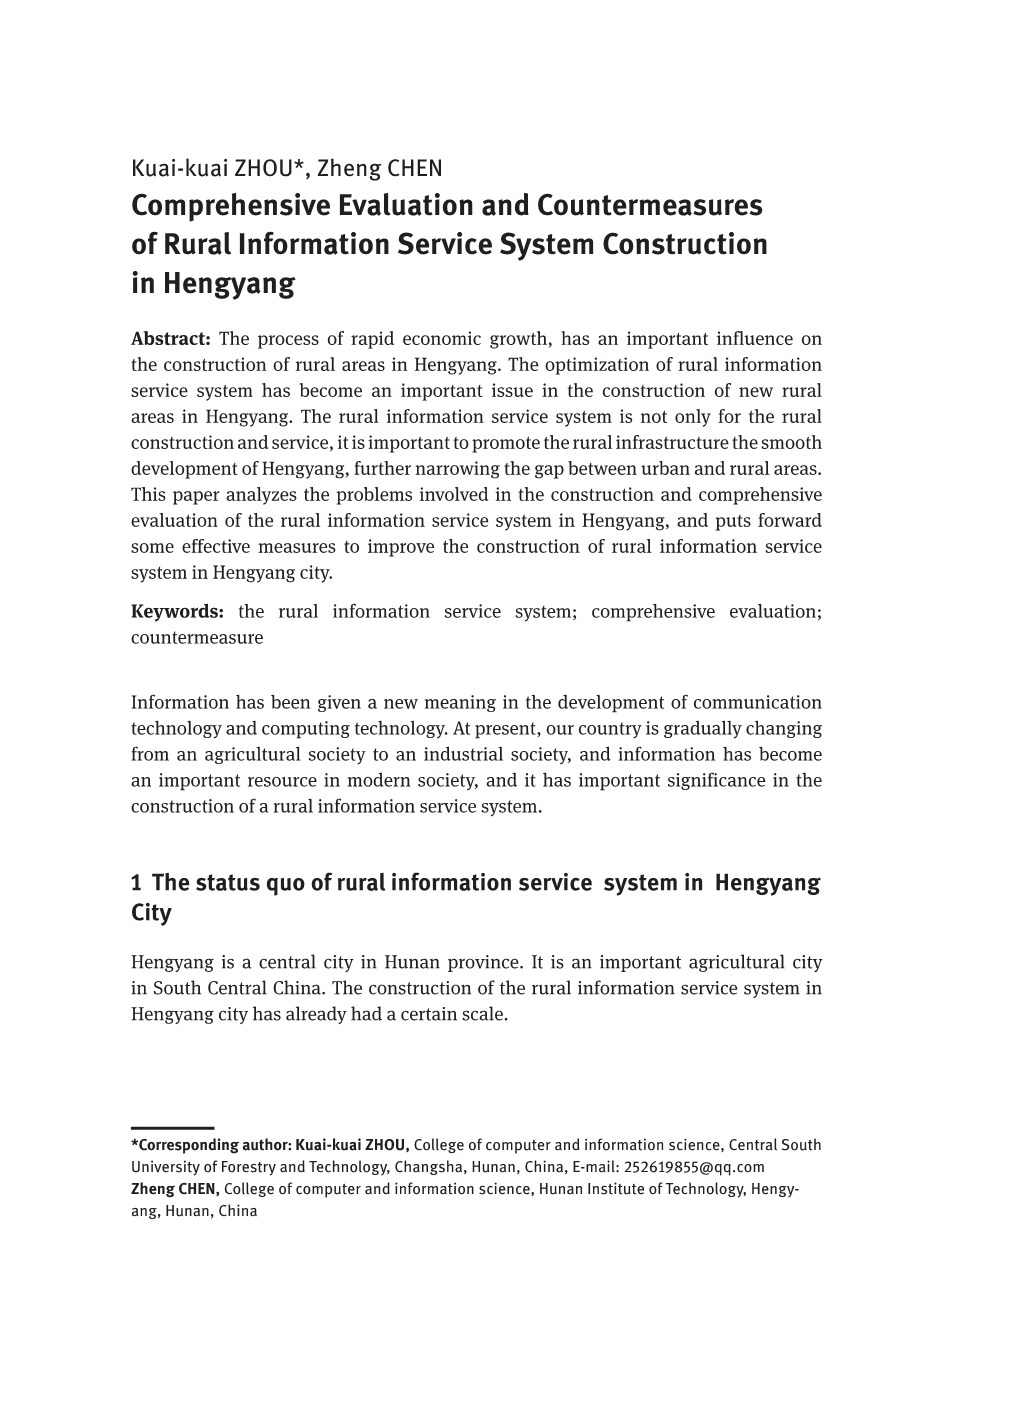 Comprehensive Evaluation and Countermeasures of Rural Information Service System Construction in Hengyang